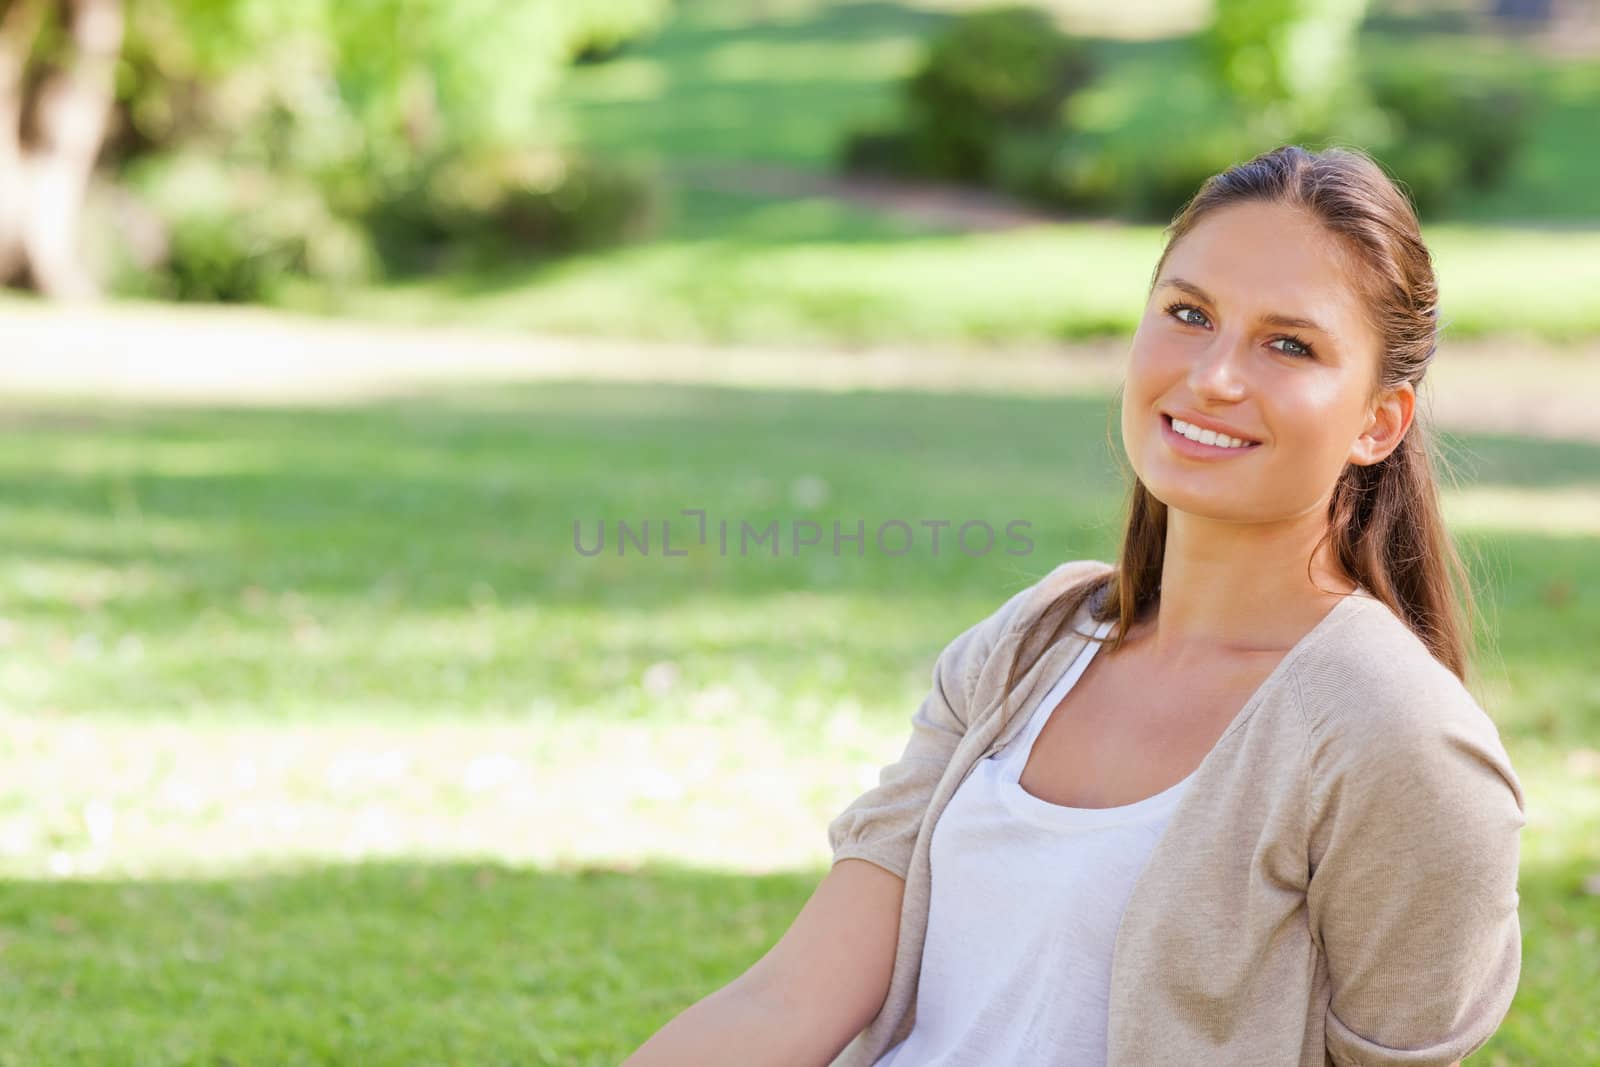 Smiling young woman enjoying her day in the park